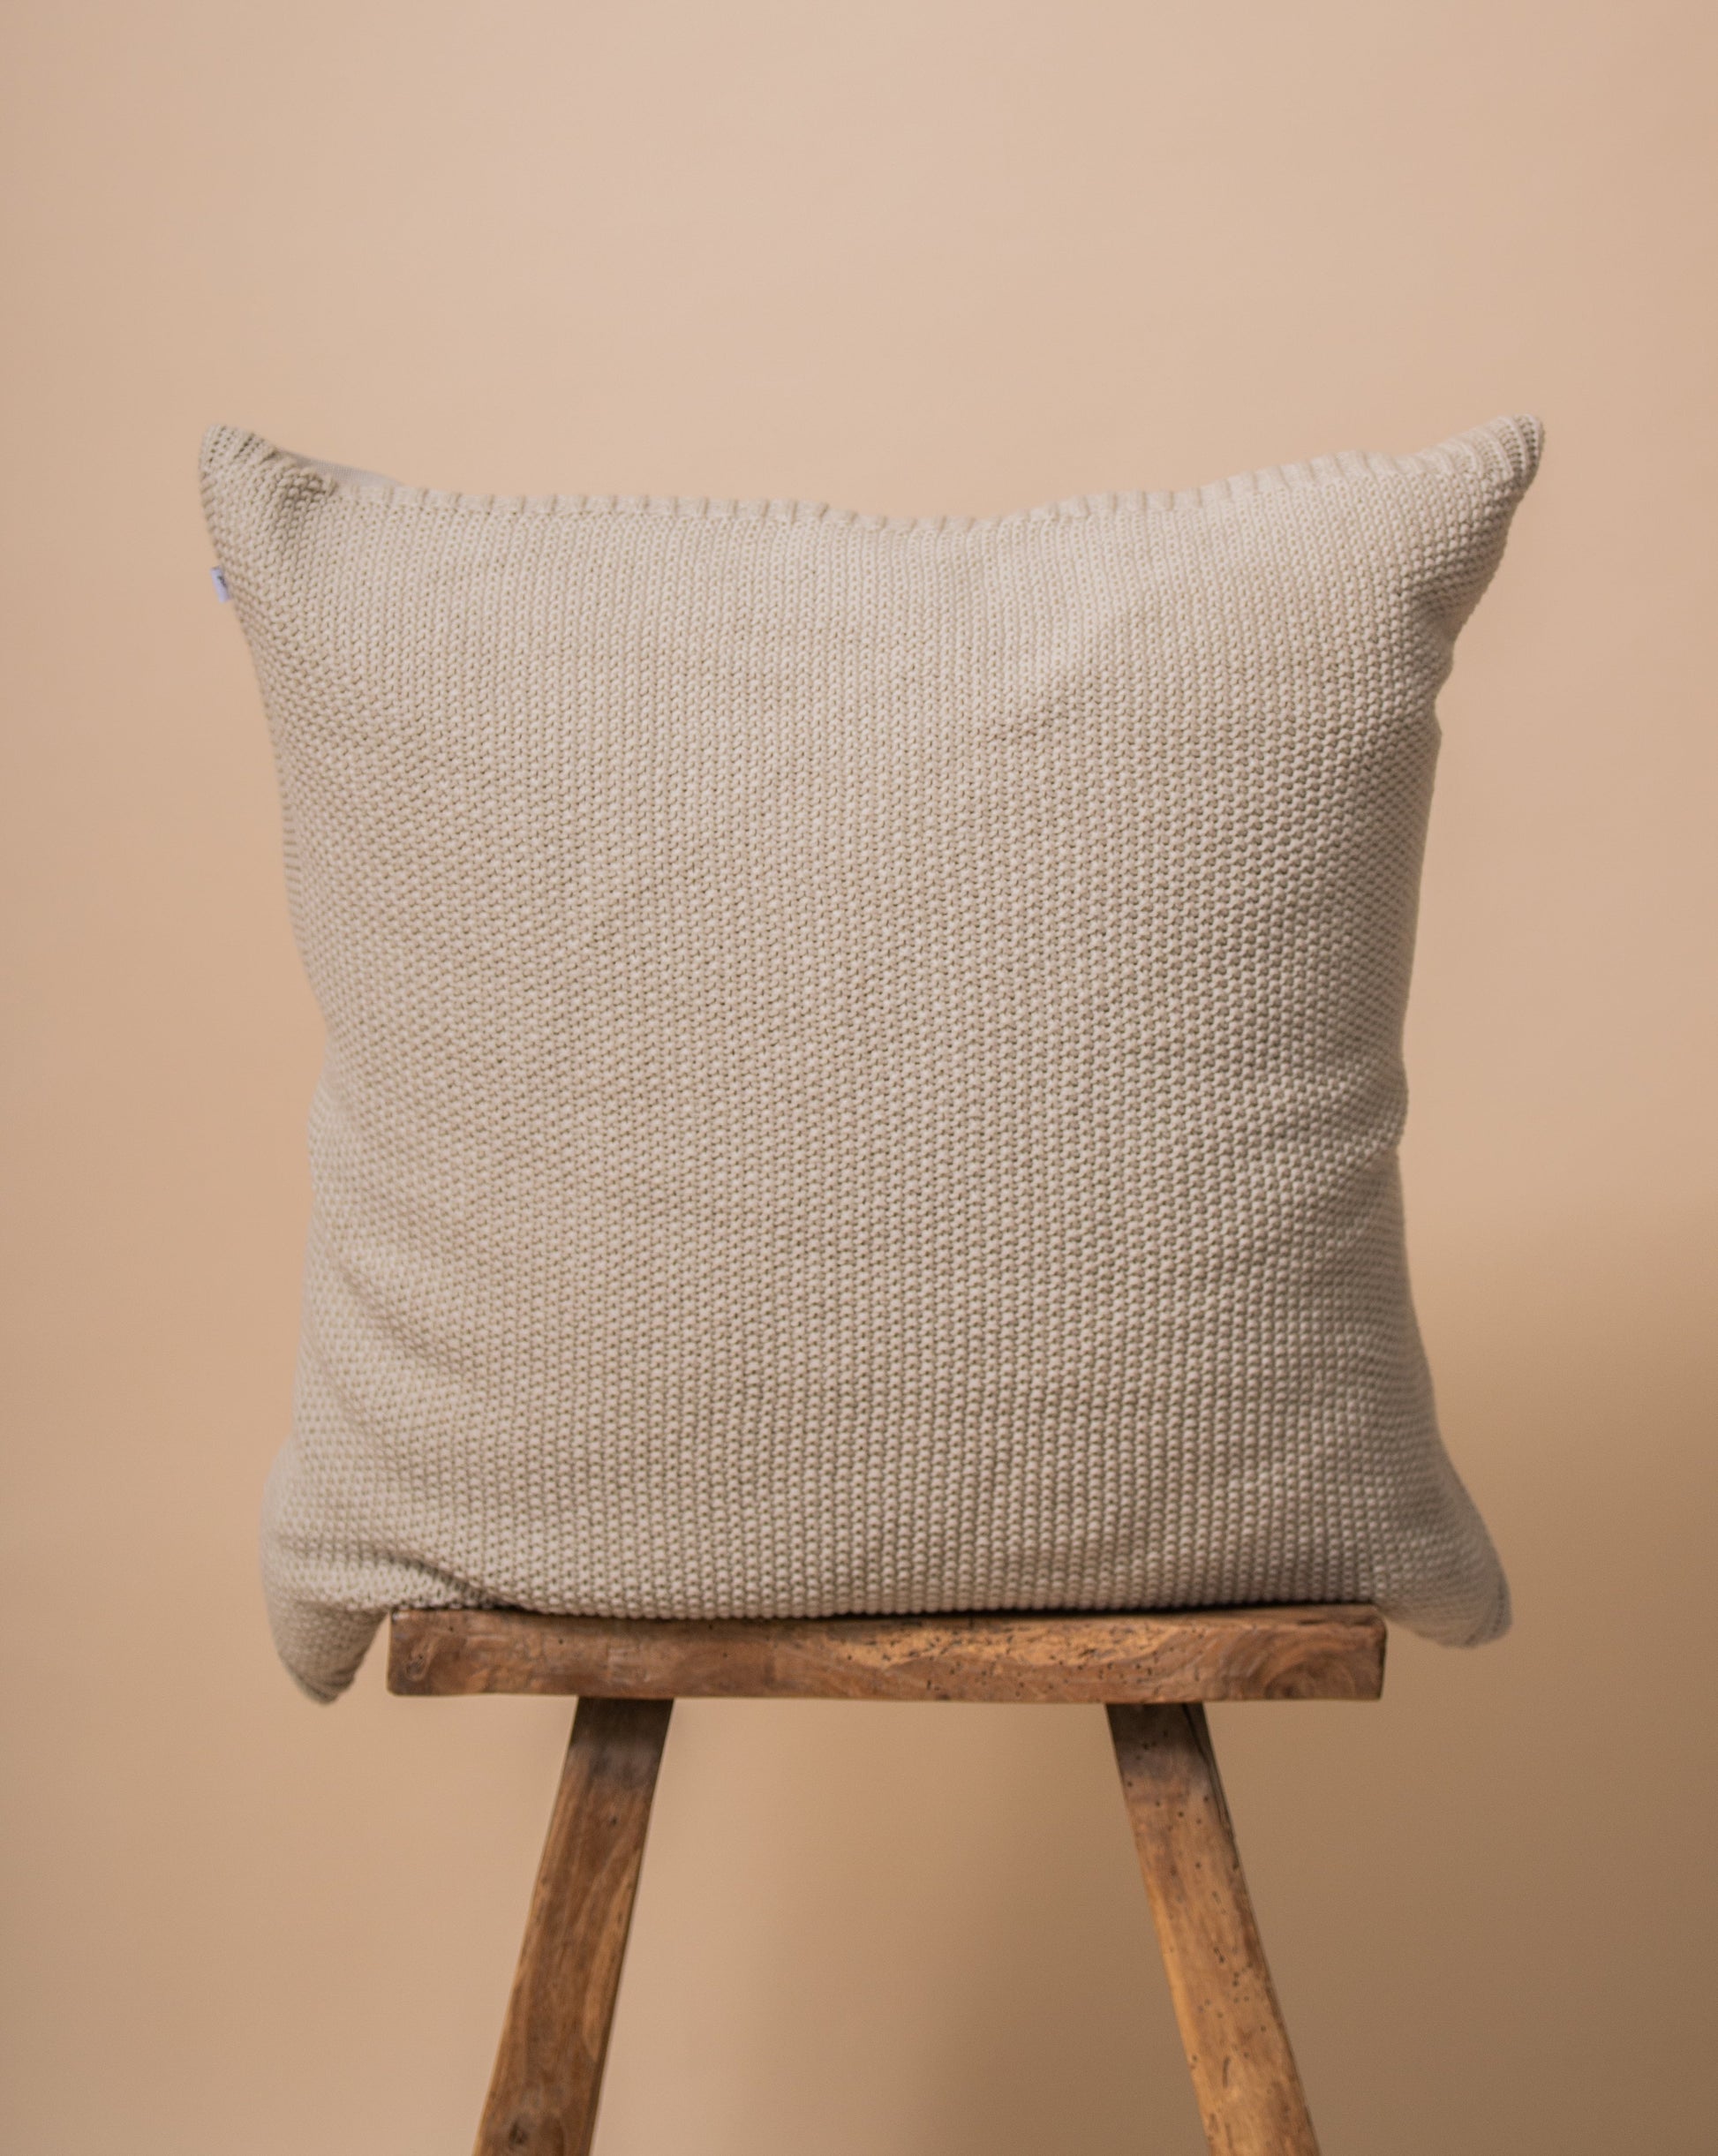 Sia Cotton Seed Stitch Knit Pillow Cover